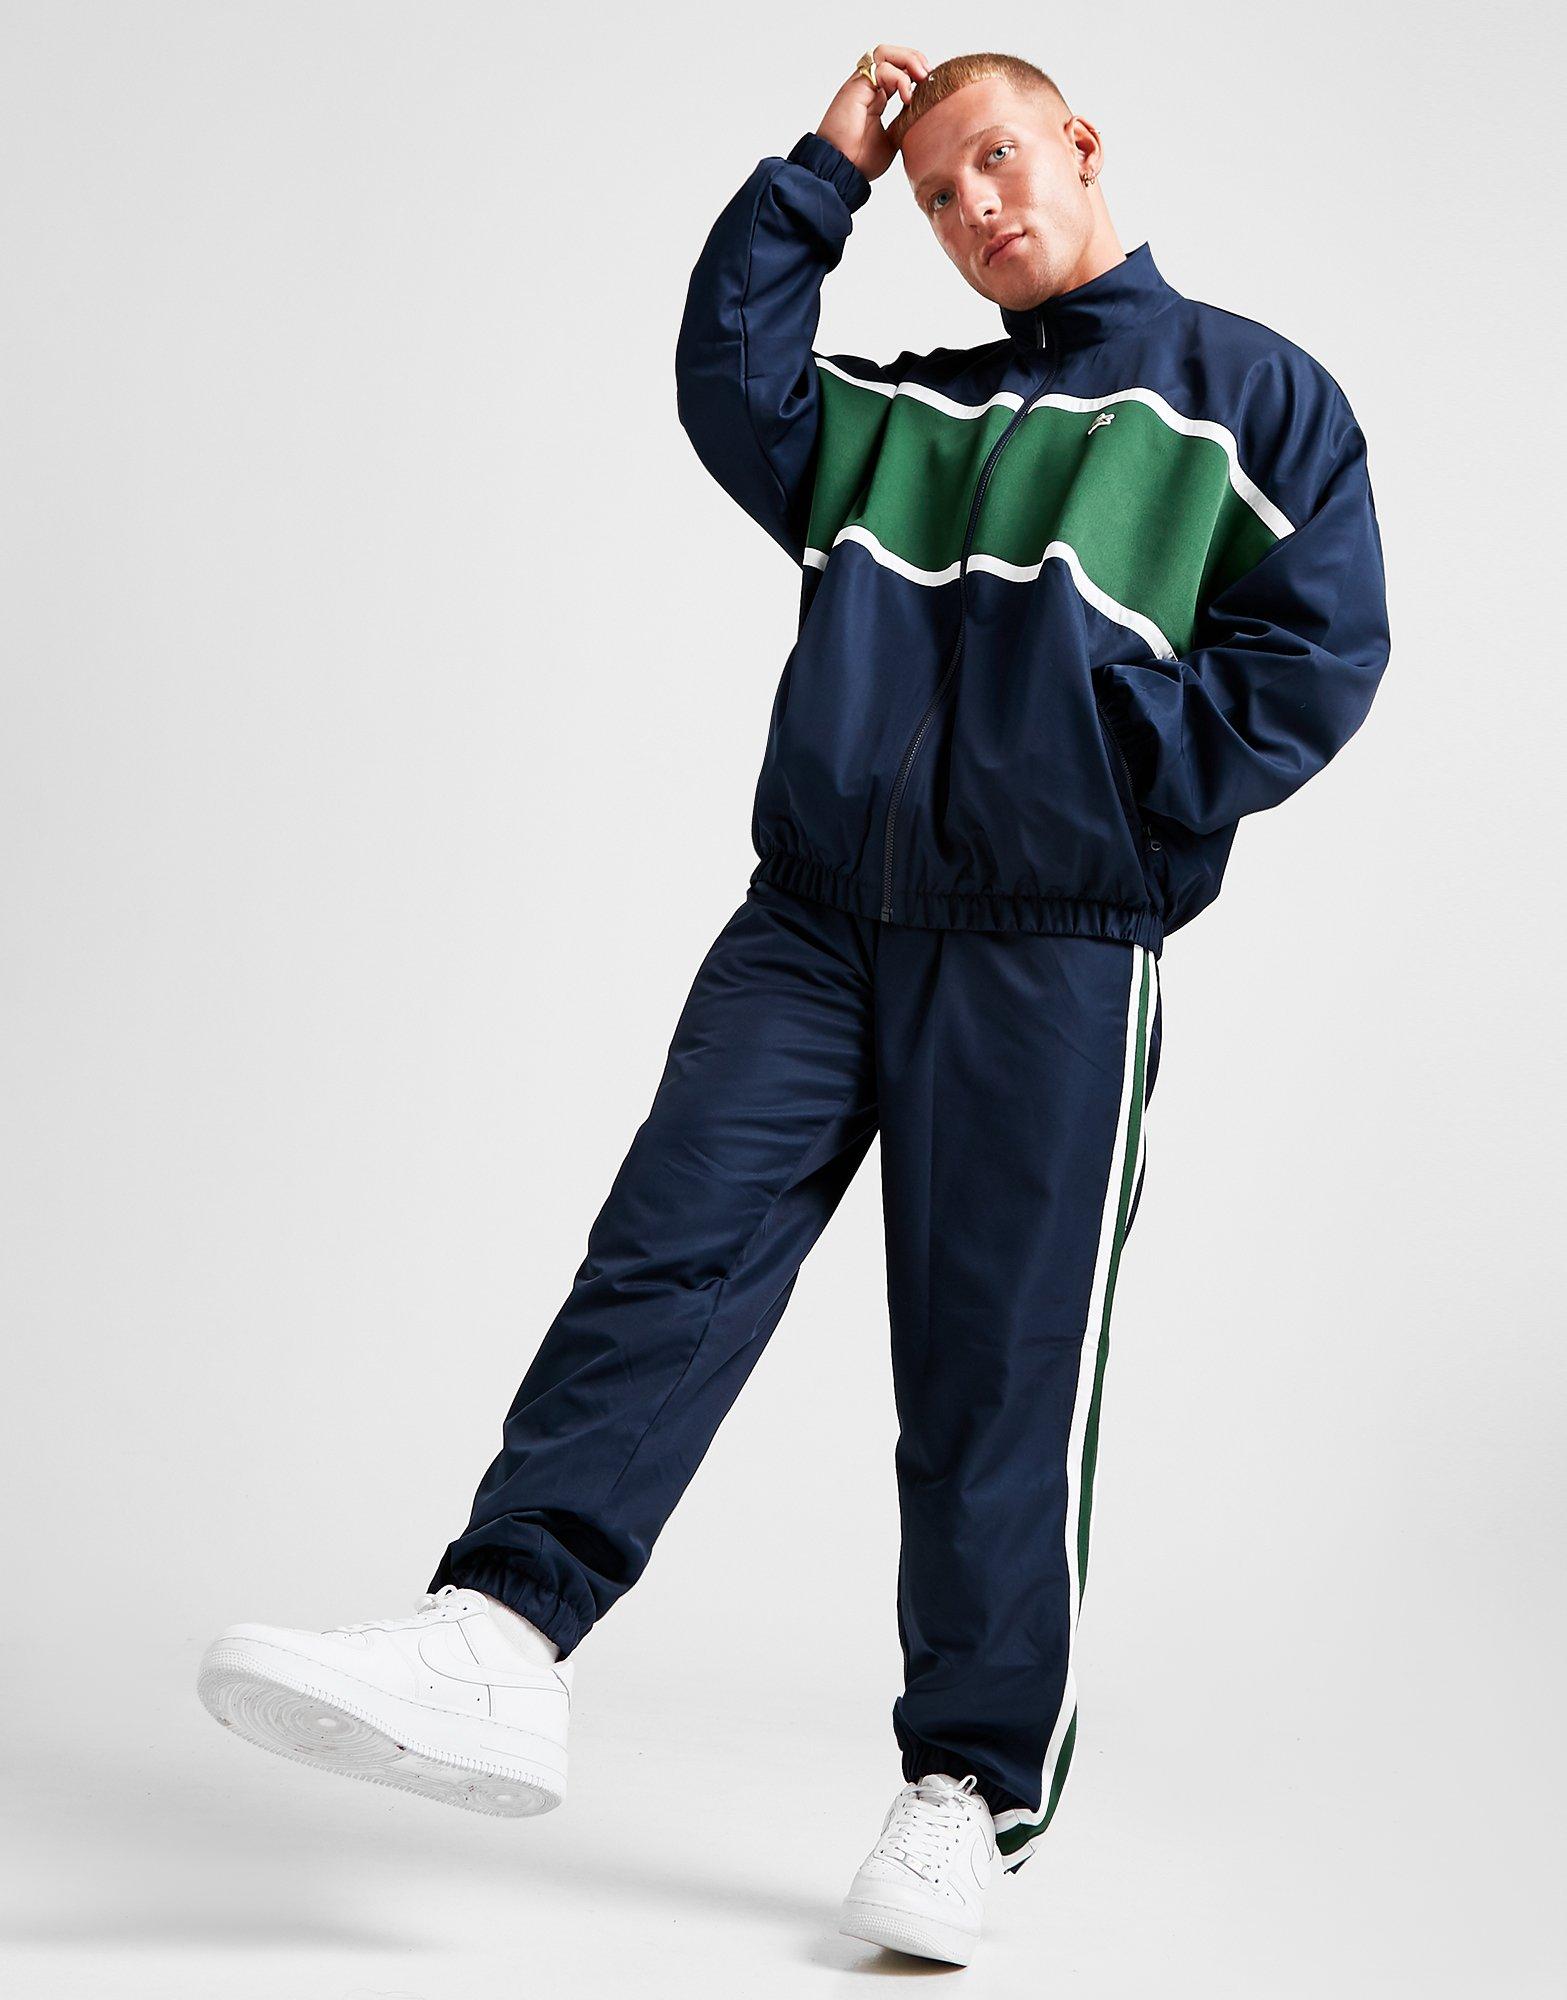 latest lacoste tracksuits